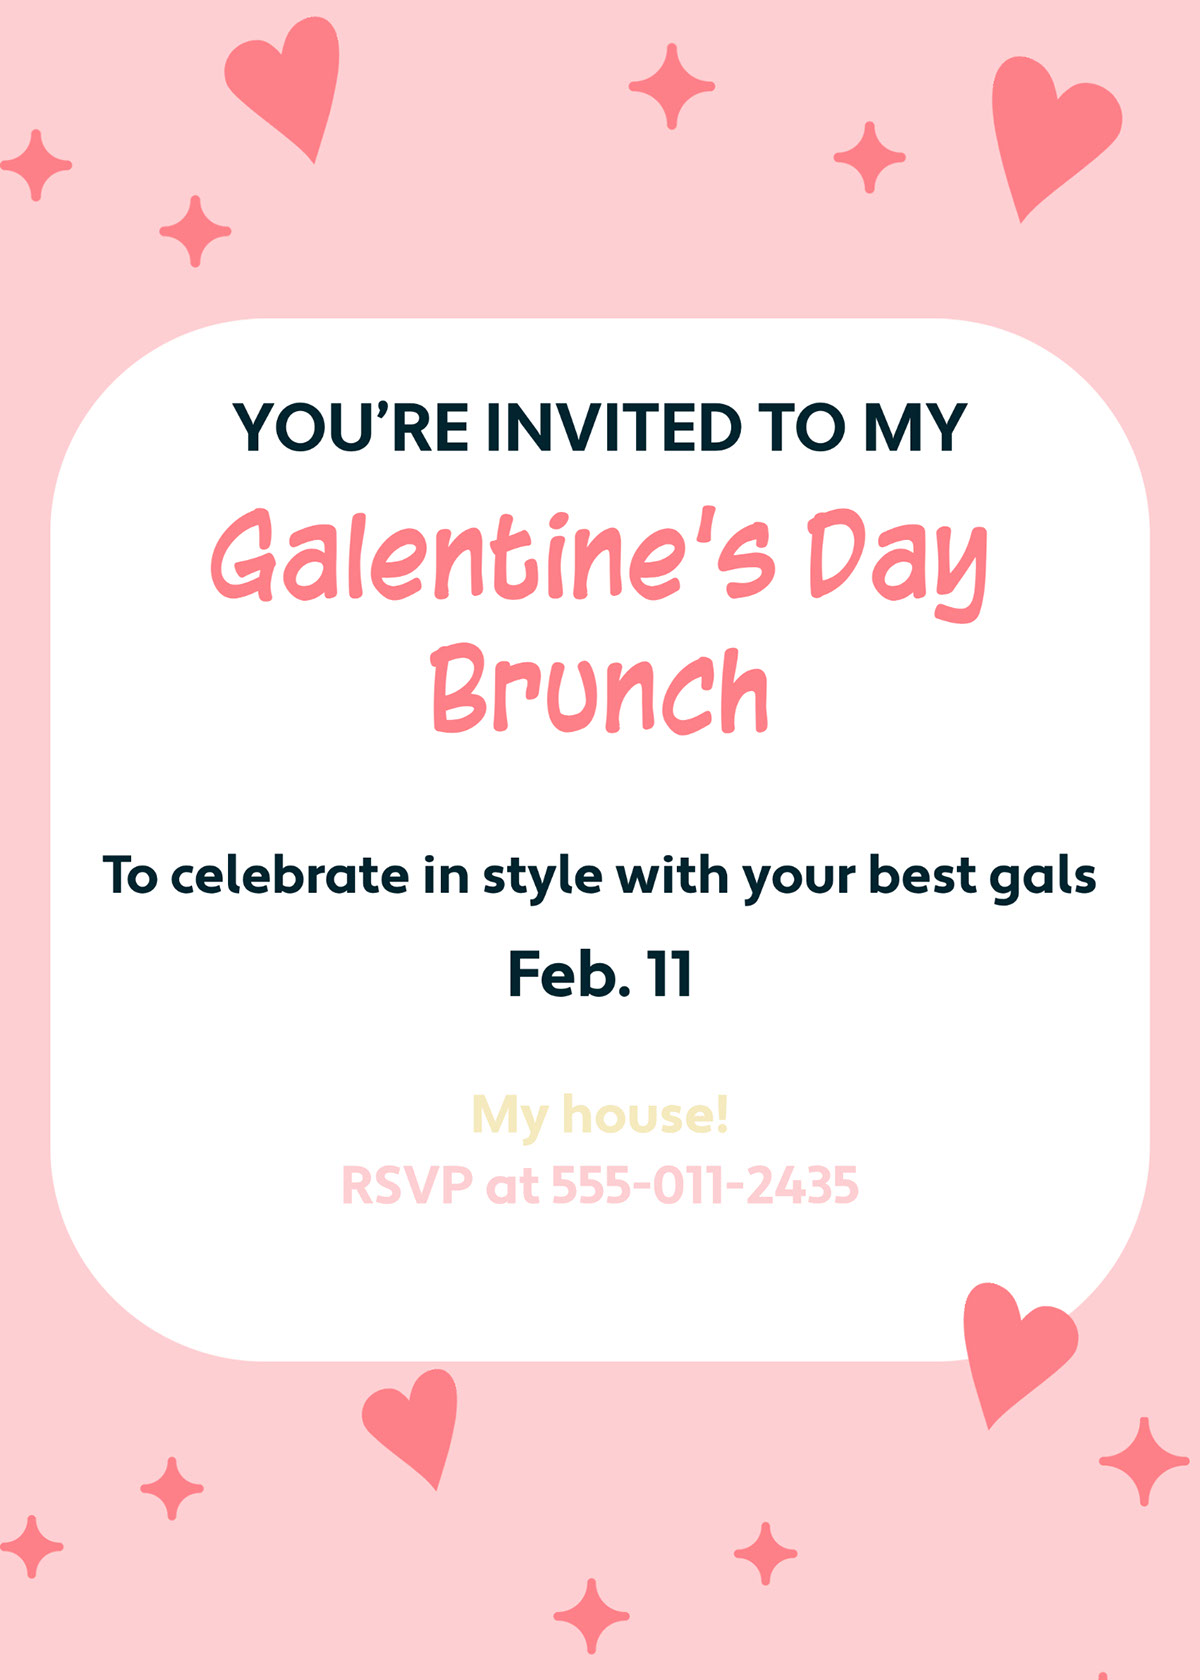 Galentine’s Day Brunch Galentine’s Day Brunch You’re invited to my Feb. 11 My house! RSVP at 555-011-2435 To celebrate in style with your best gals